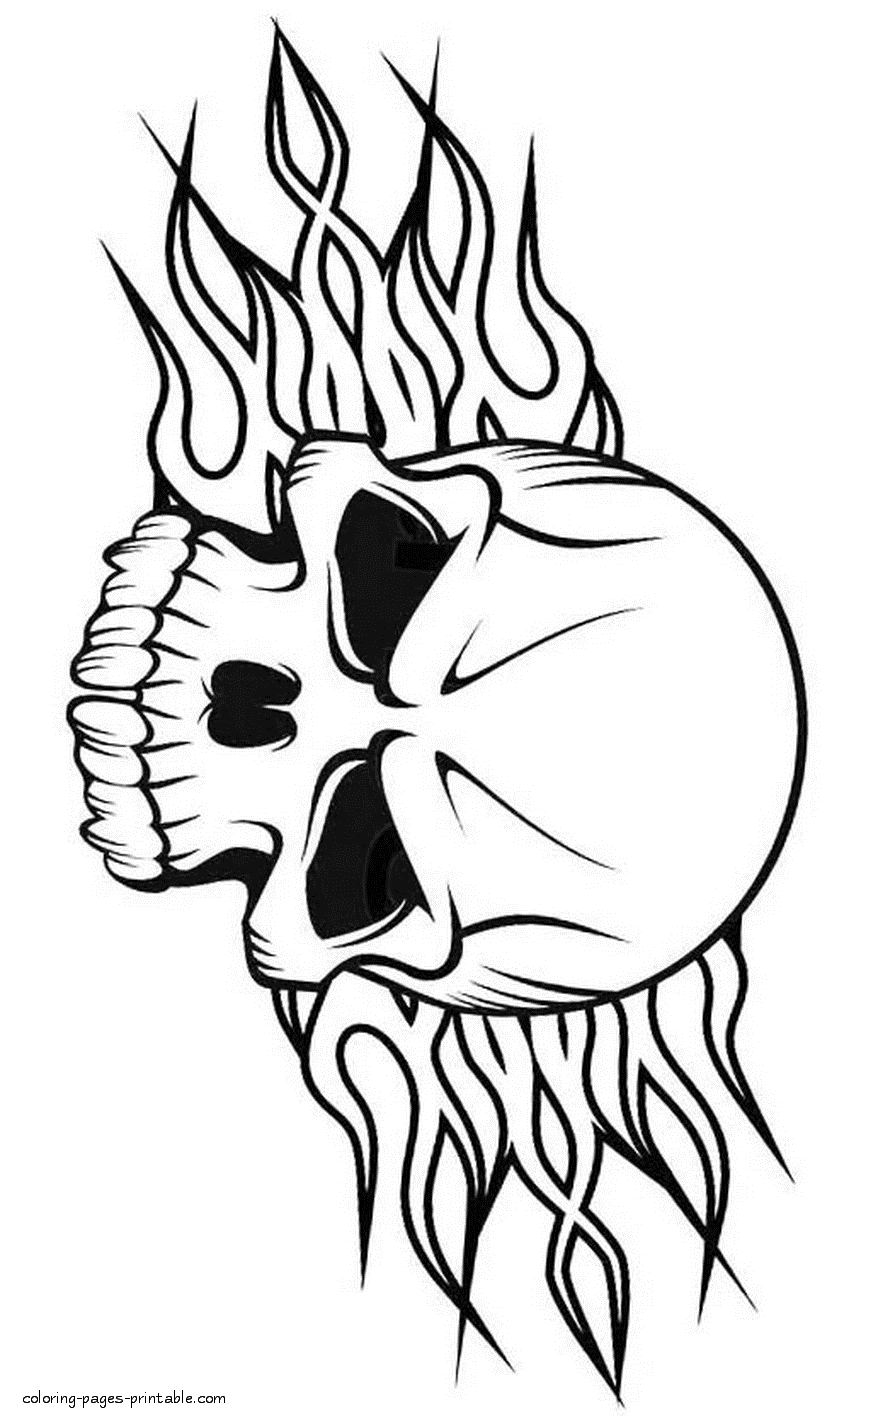 Flamed Skull Coloring Page || COLORING-PAGES-PRINTABLE.COM